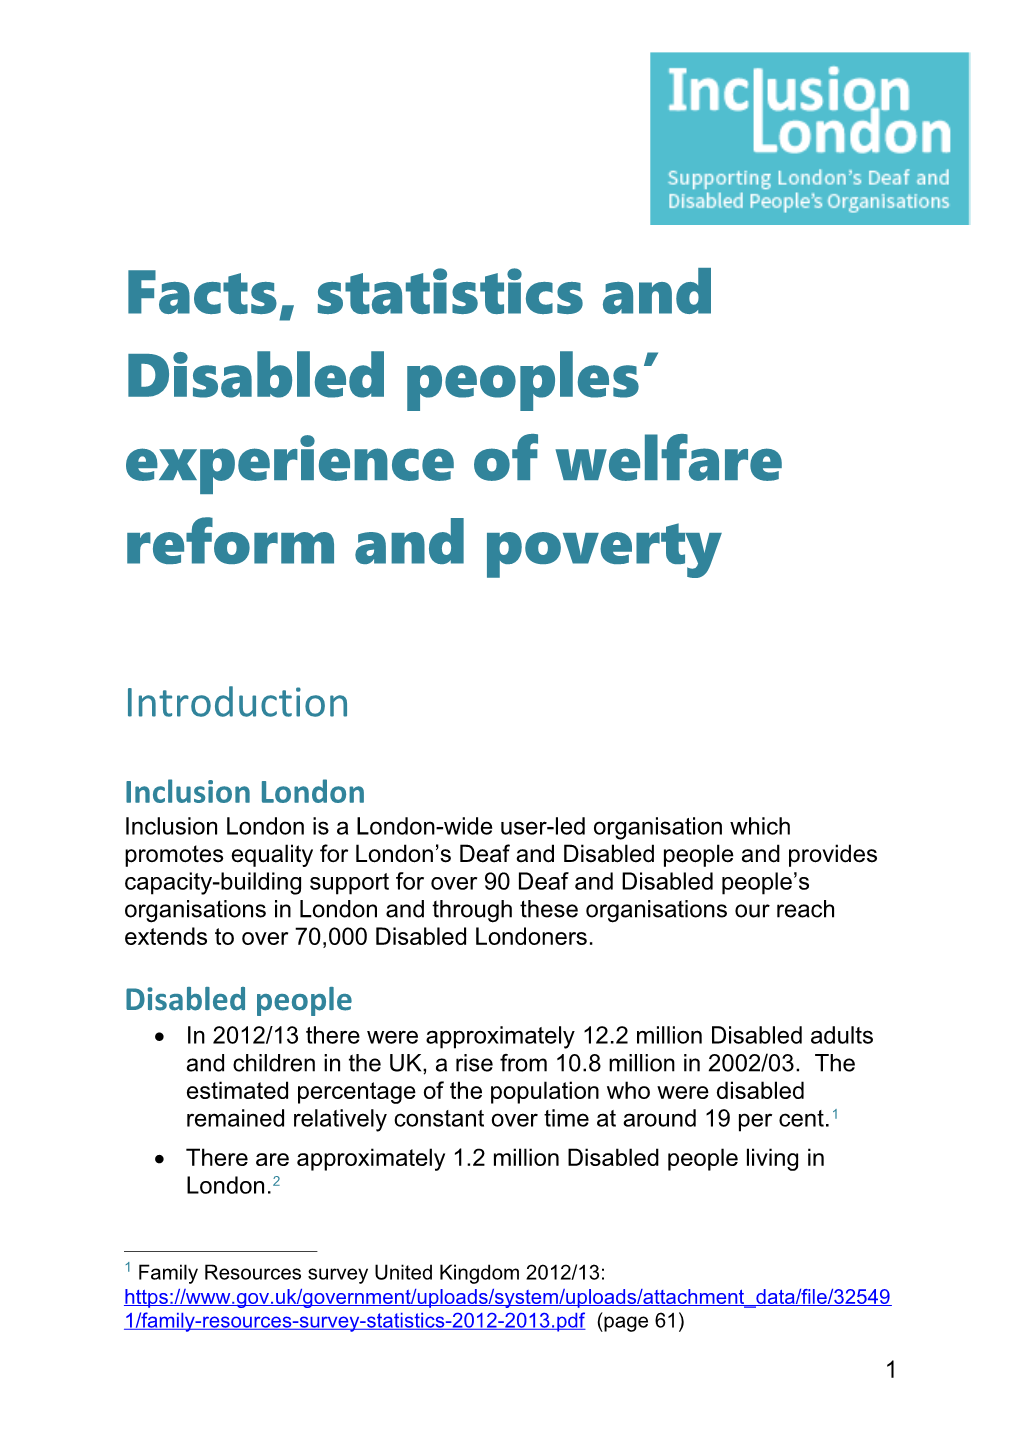 Facts, Statistics and Disabled Peoples Experience of Welfare Reform and Poverty